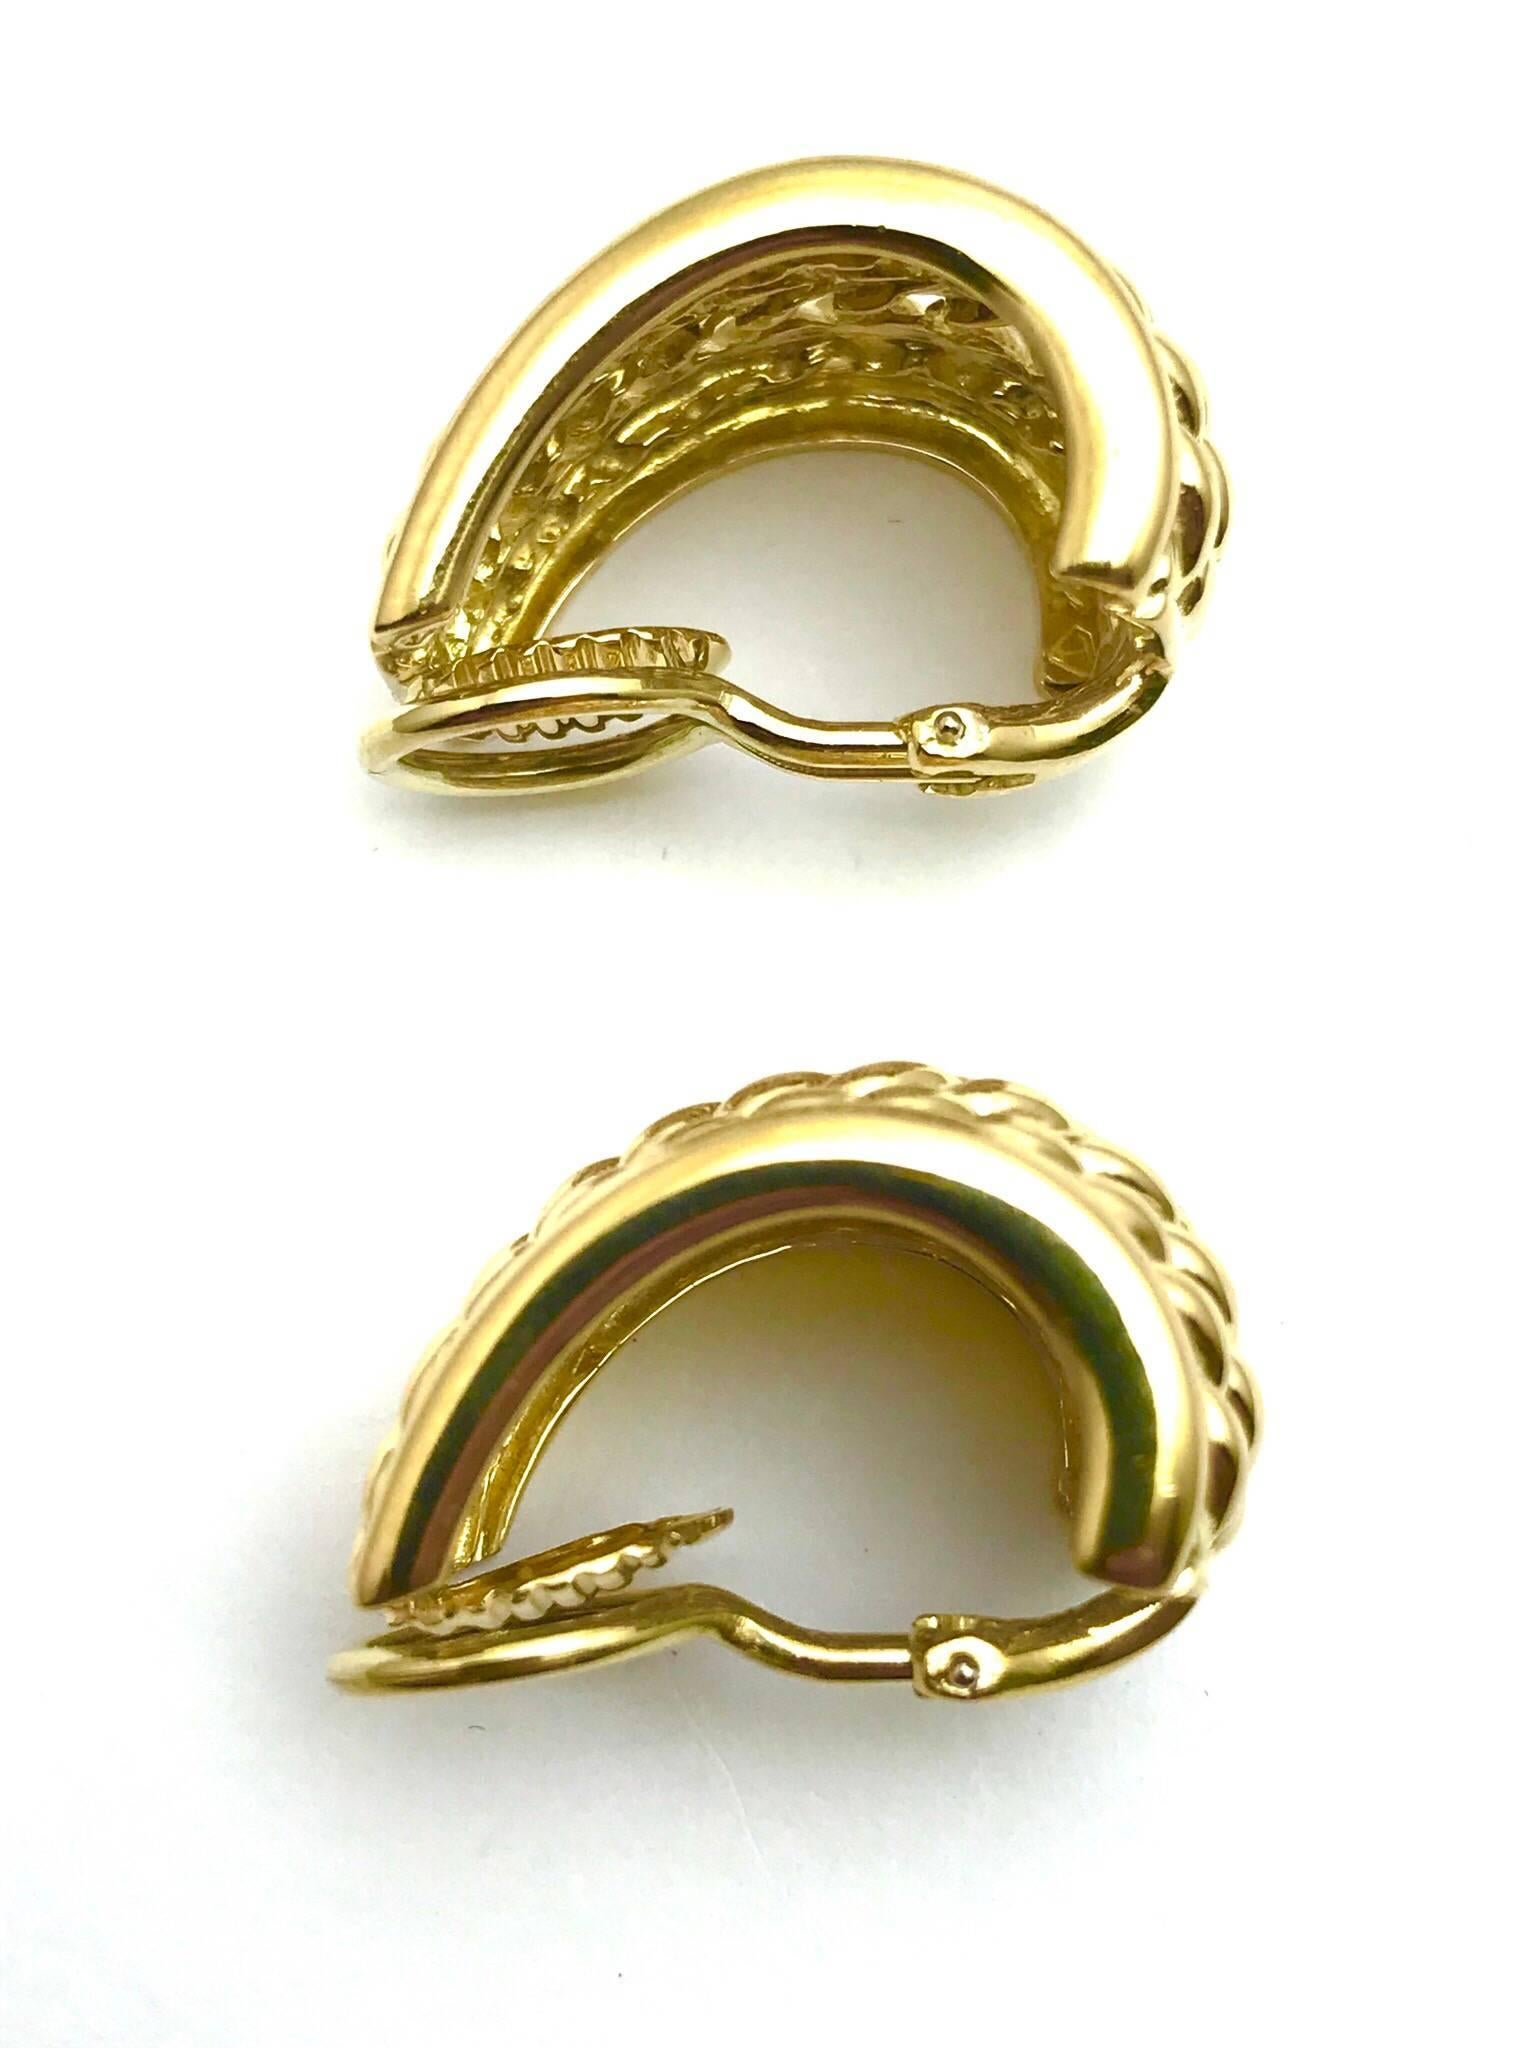 A pair of 18 karat yellow gold basket weave drop clip-on earrings.  The earrings are domed towards the bottom and taper toward the top of the ear.  (A Post can be added)

Hallmark:  18K